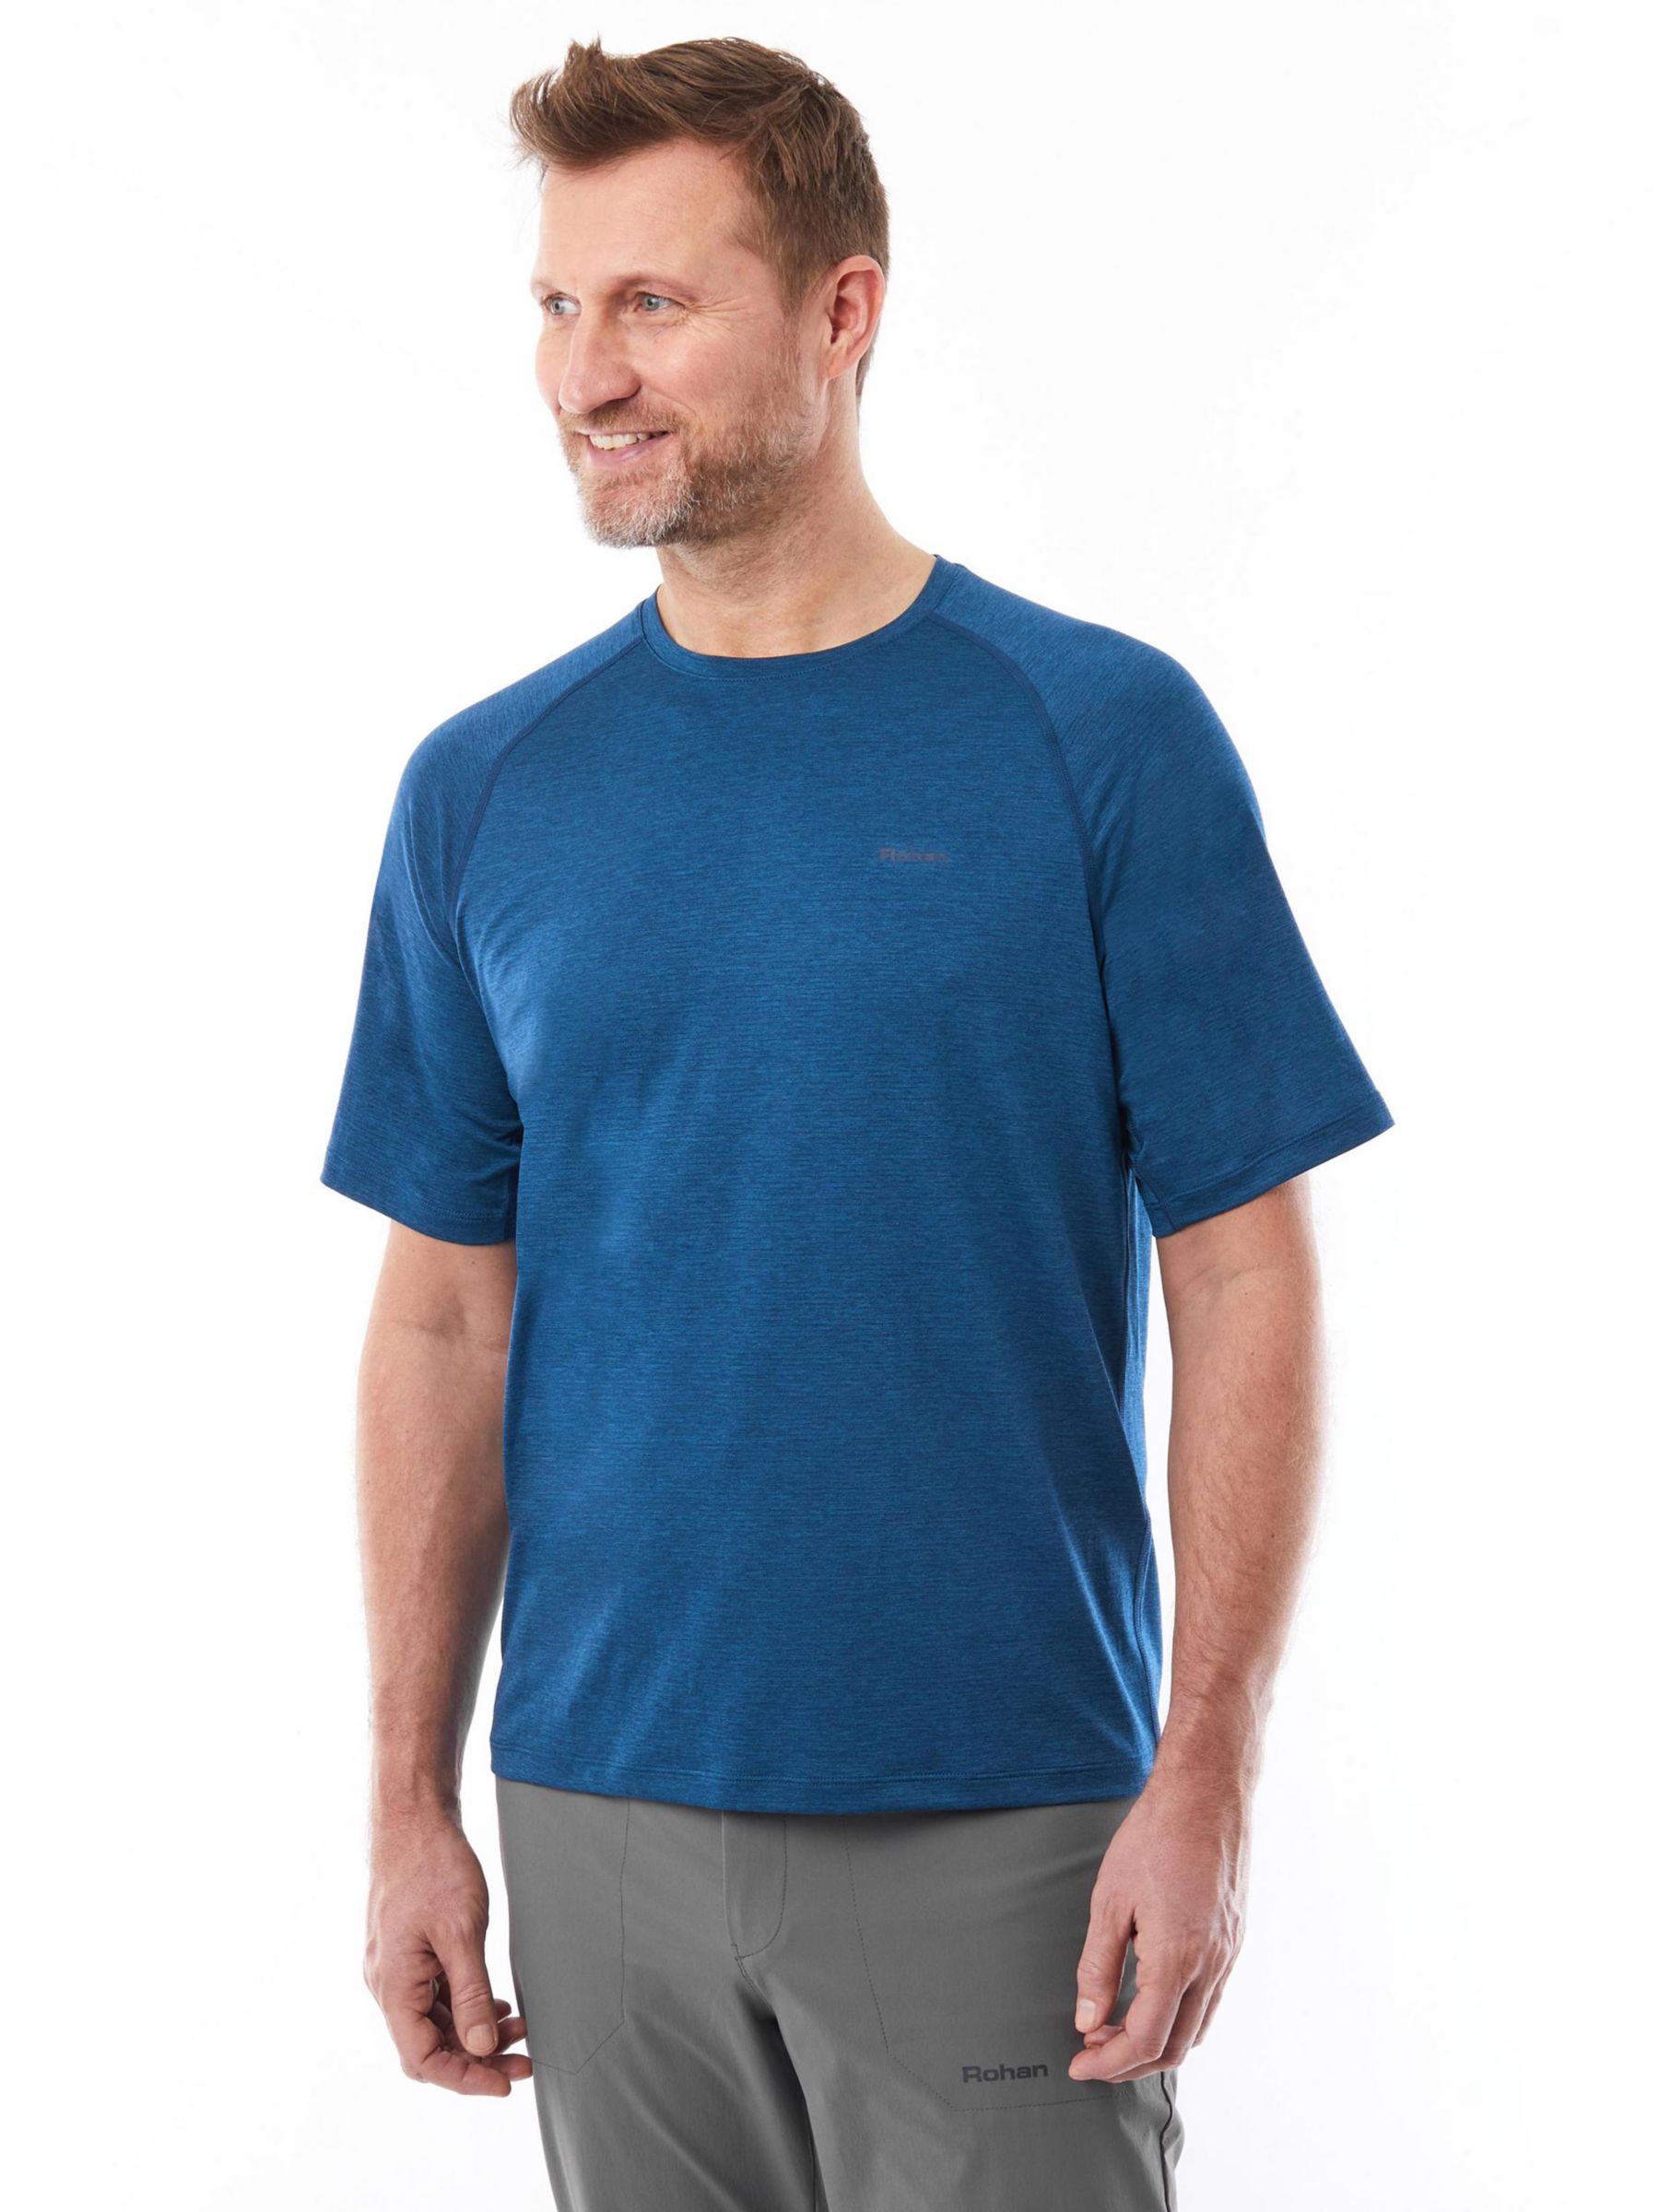 Buy Rohan High Wicking Vapour Short Sleeve T-Shirt, Electric Blue Online at johnlewis.com